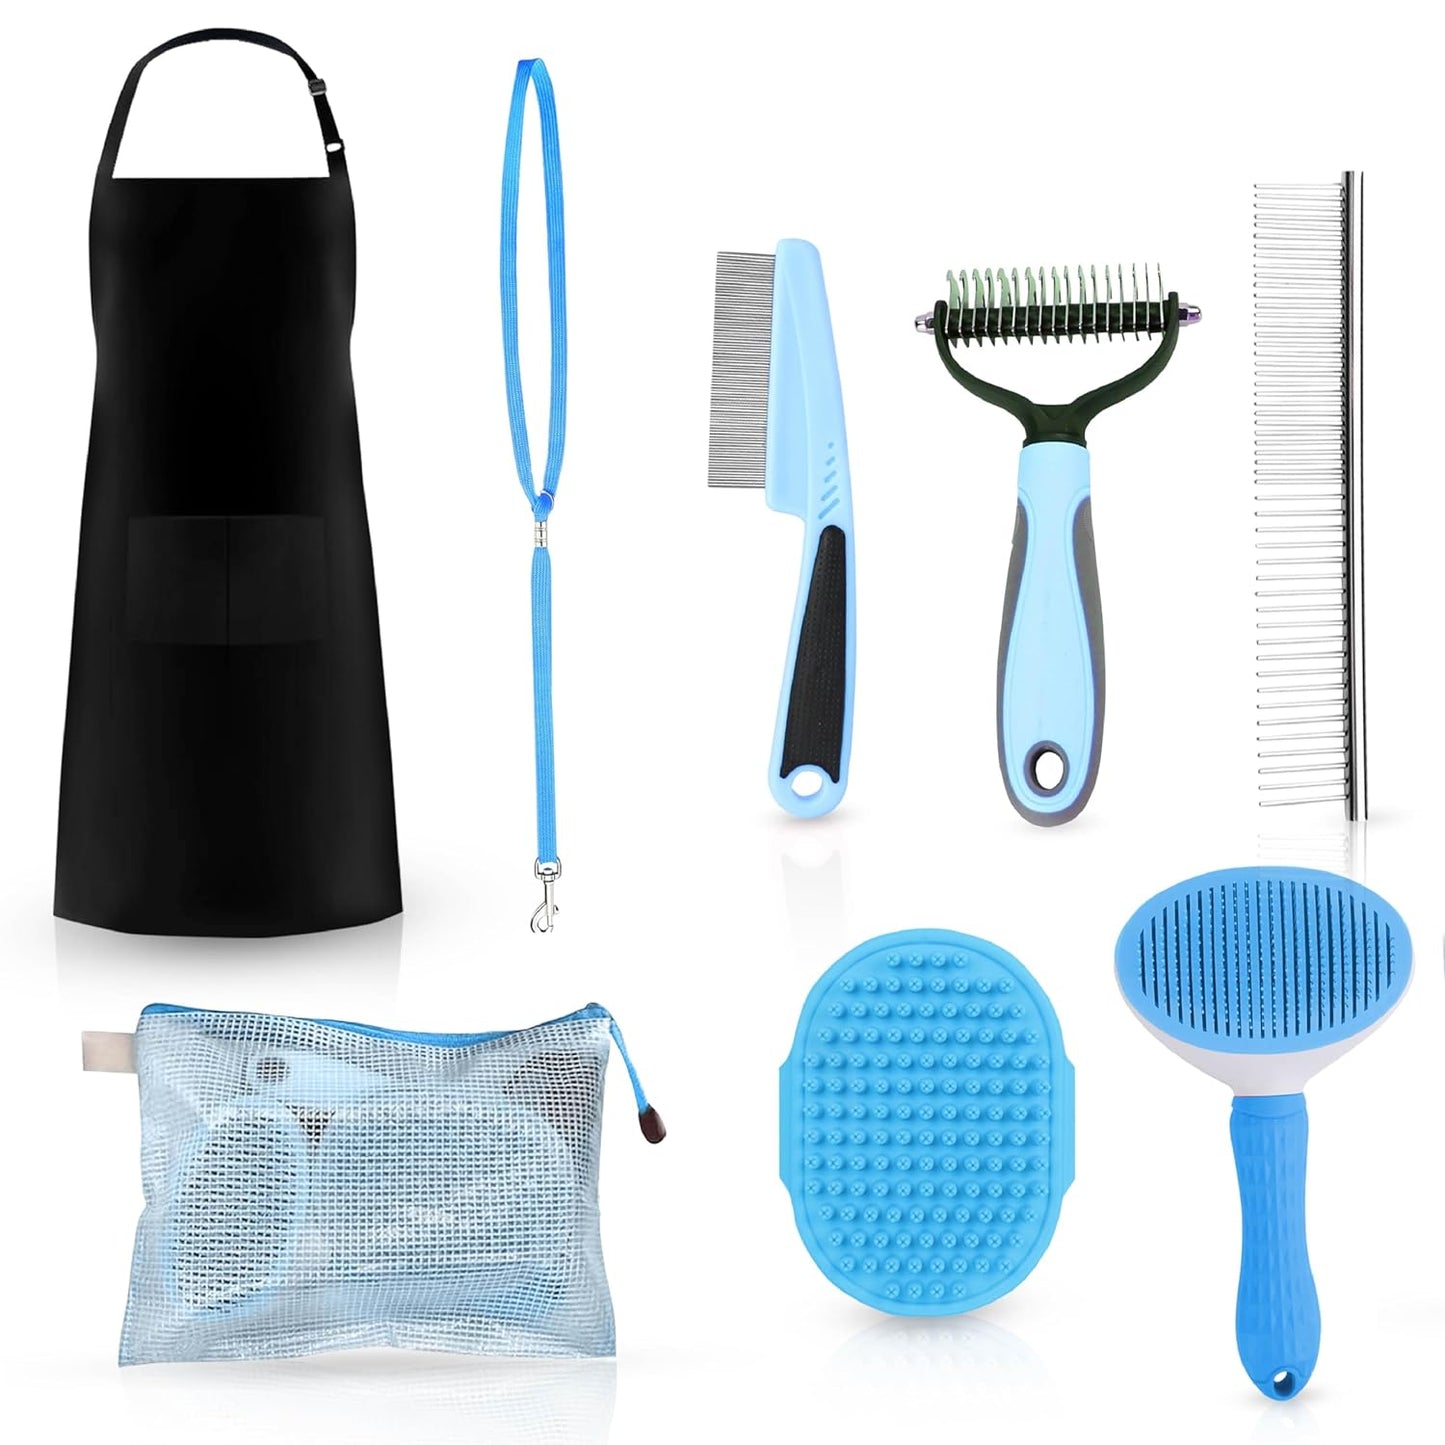 Cat and Dog Brushes for Grooming – Pet Grooming Kit with Brushes, Grooming Loop Leash and Apron – Professional Dog Grooming Supplies with Dematting Comb, Slicker Brush, Dog Bath Brush